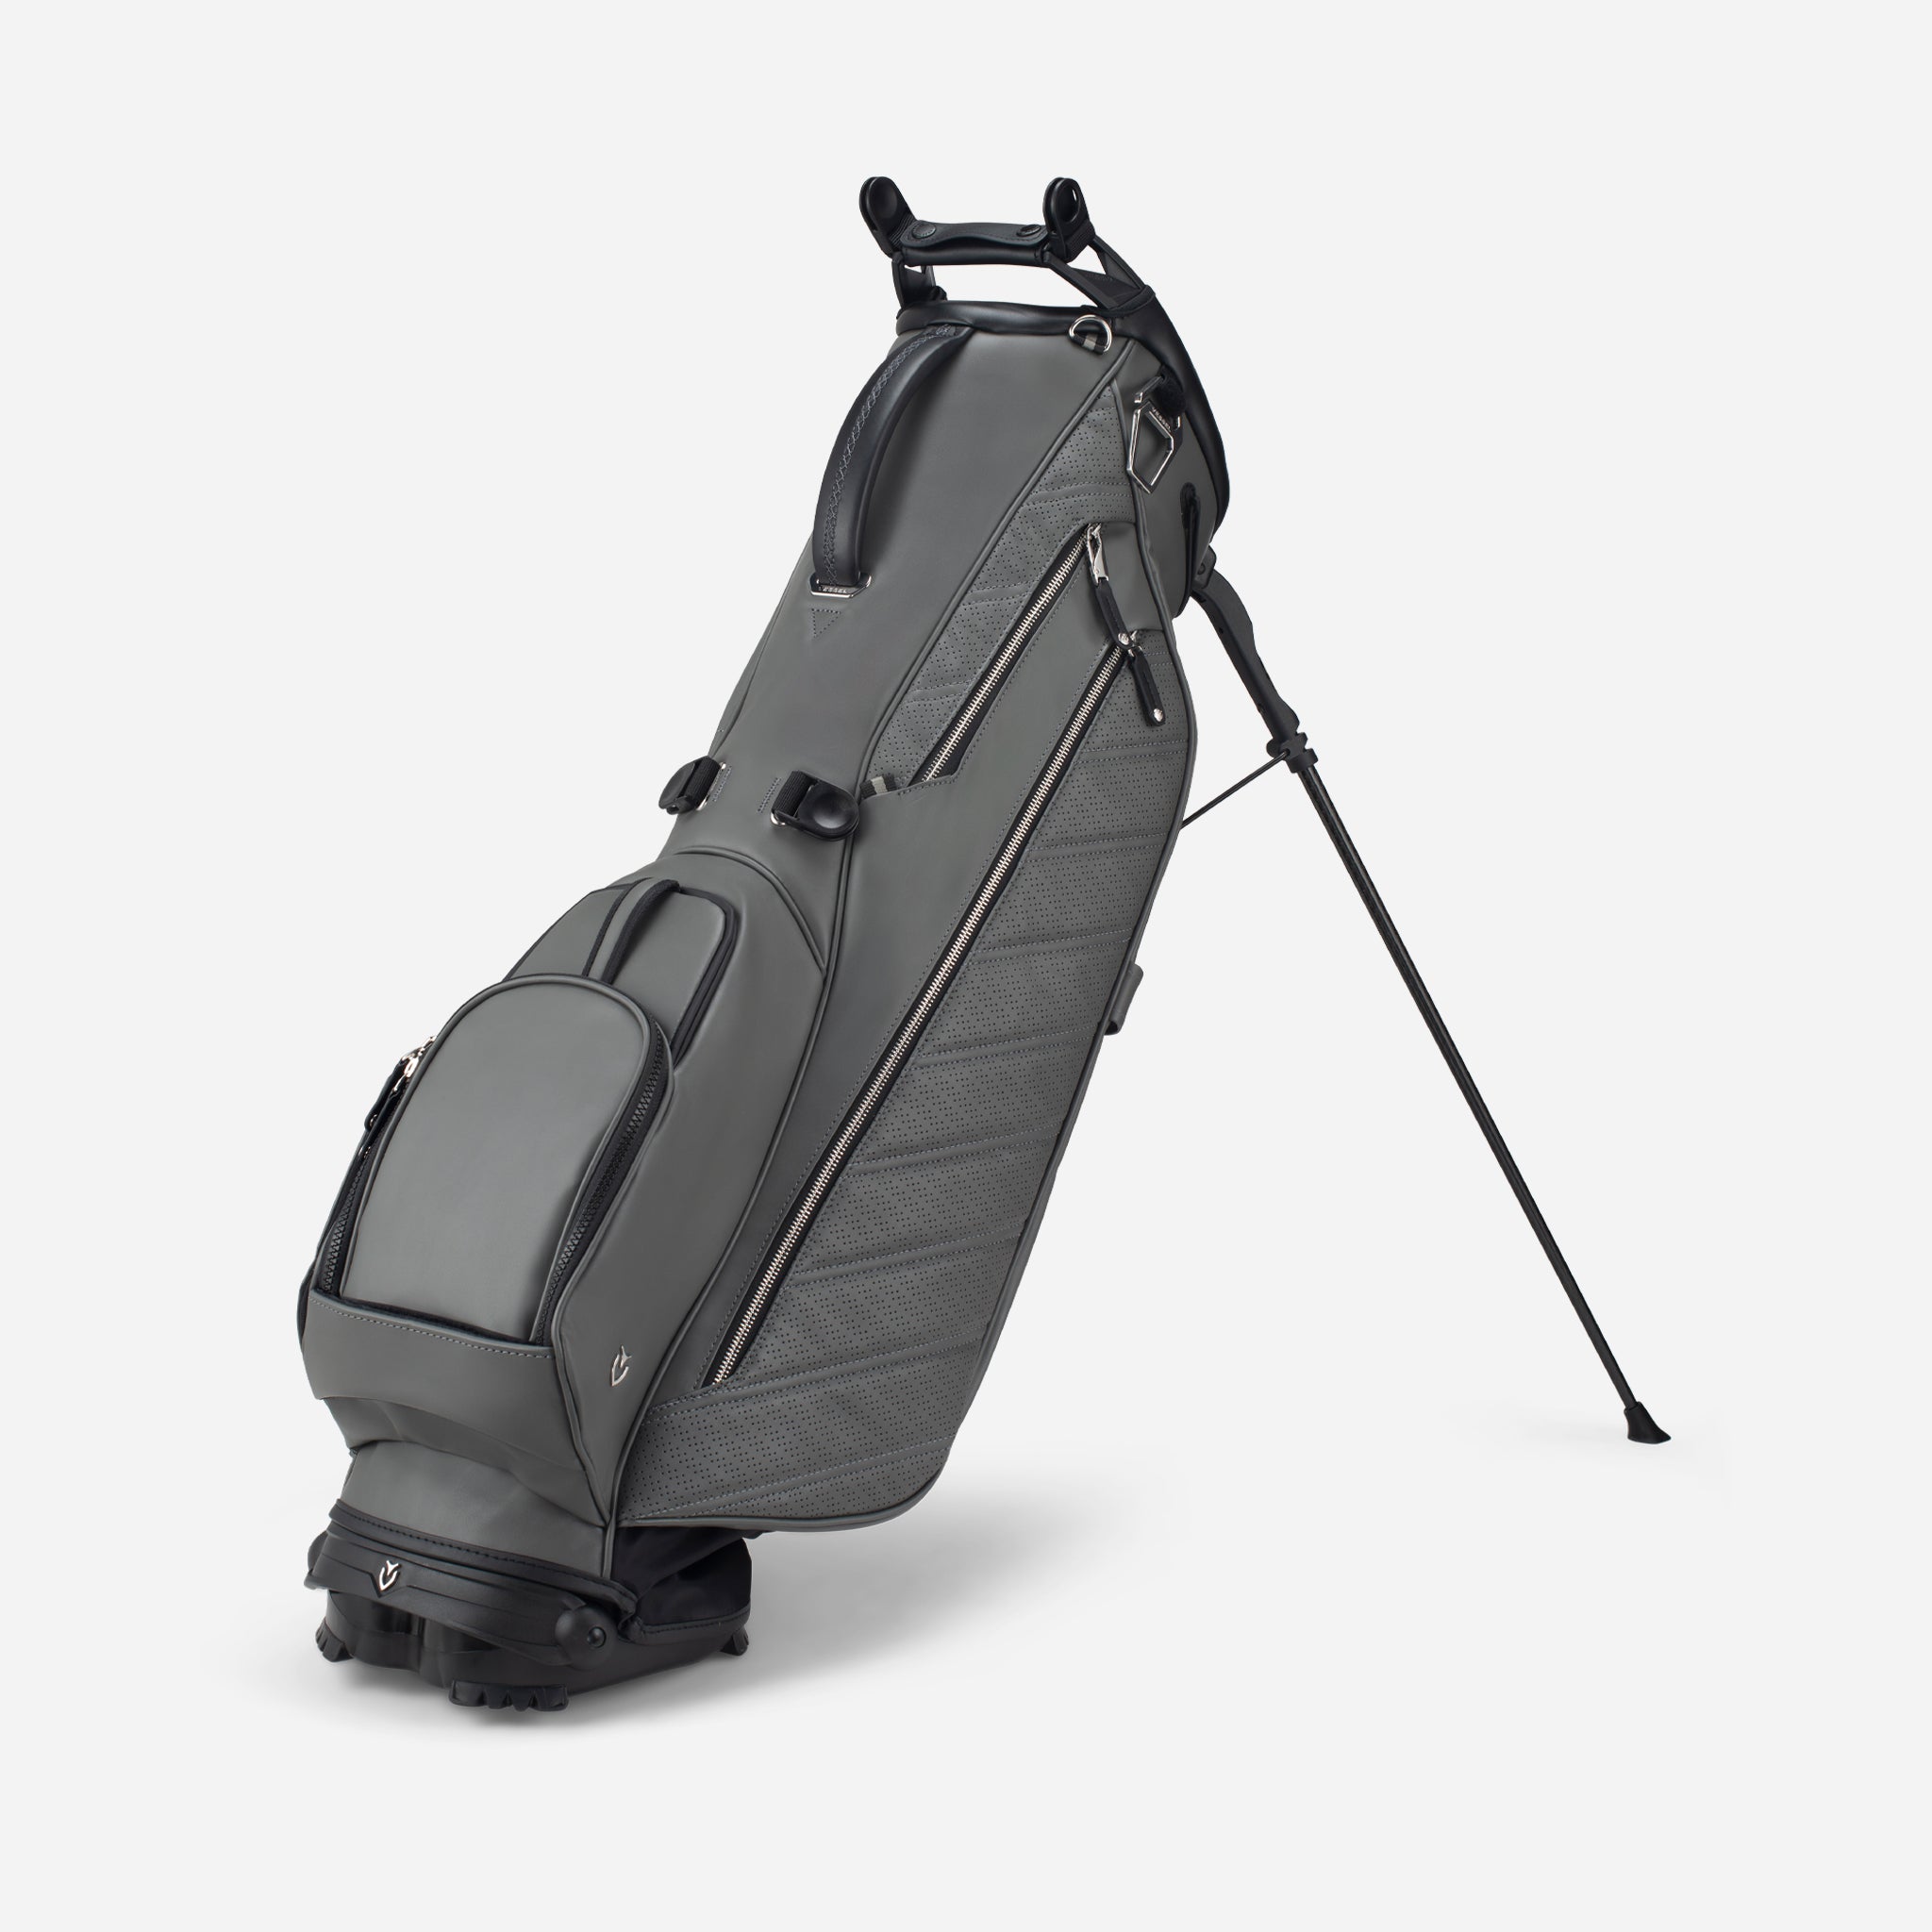 Vessel Golf VLS LUX Carry Stand Bag 7.5x 47in SINGLE STRAP MODEL